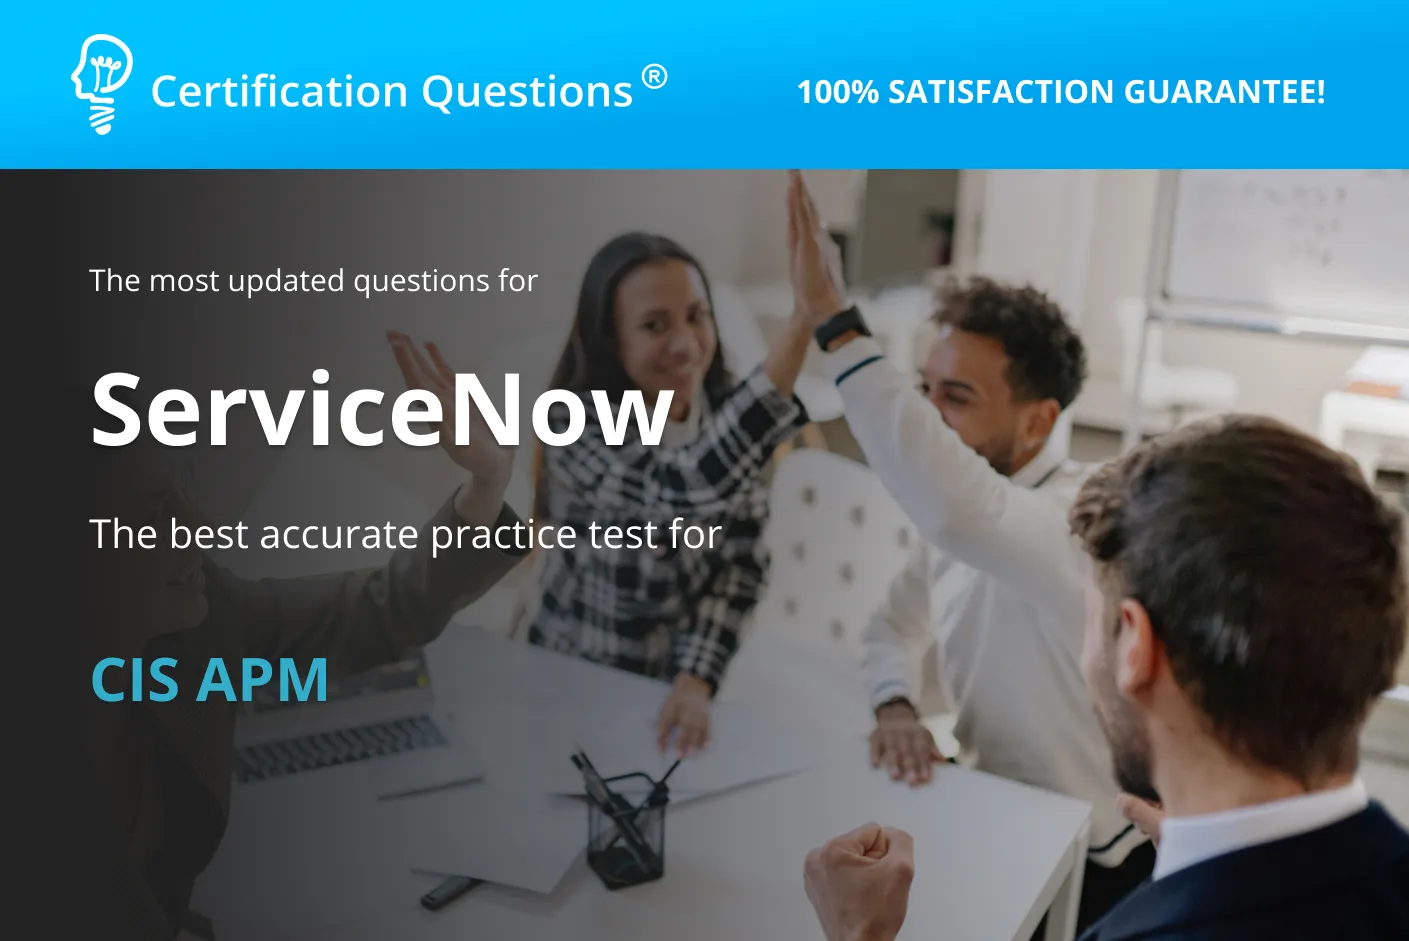 This image is related to the study guide of the Servicenow APM Practice Test